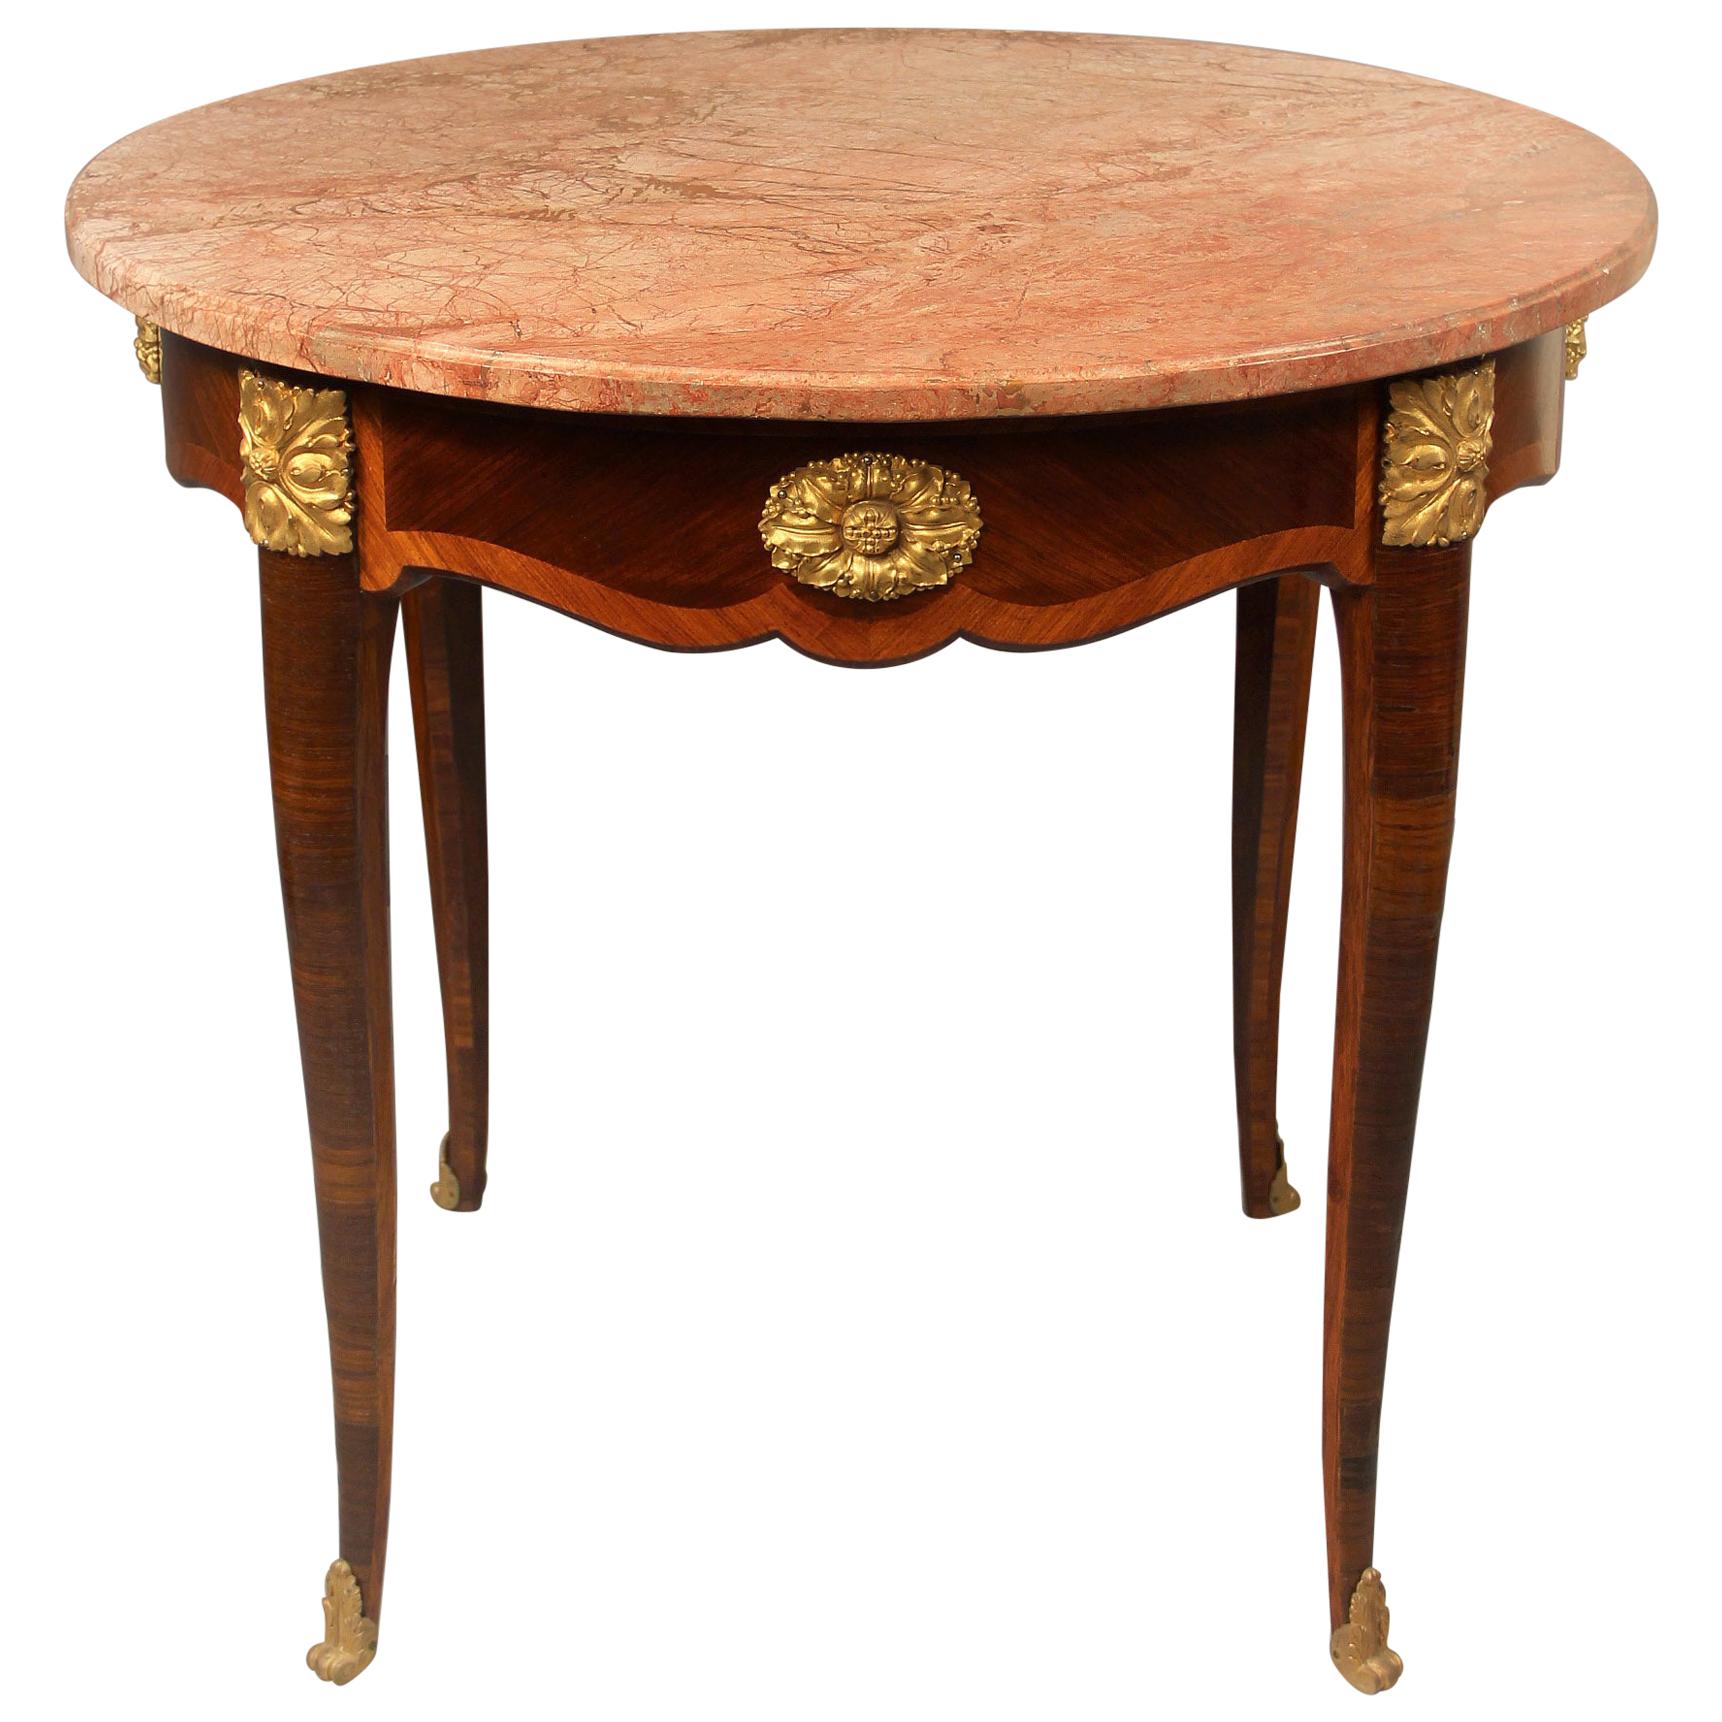 Nice Late 19th-Early 20th Century Gilt Bronze Mounted Center Table For Sale